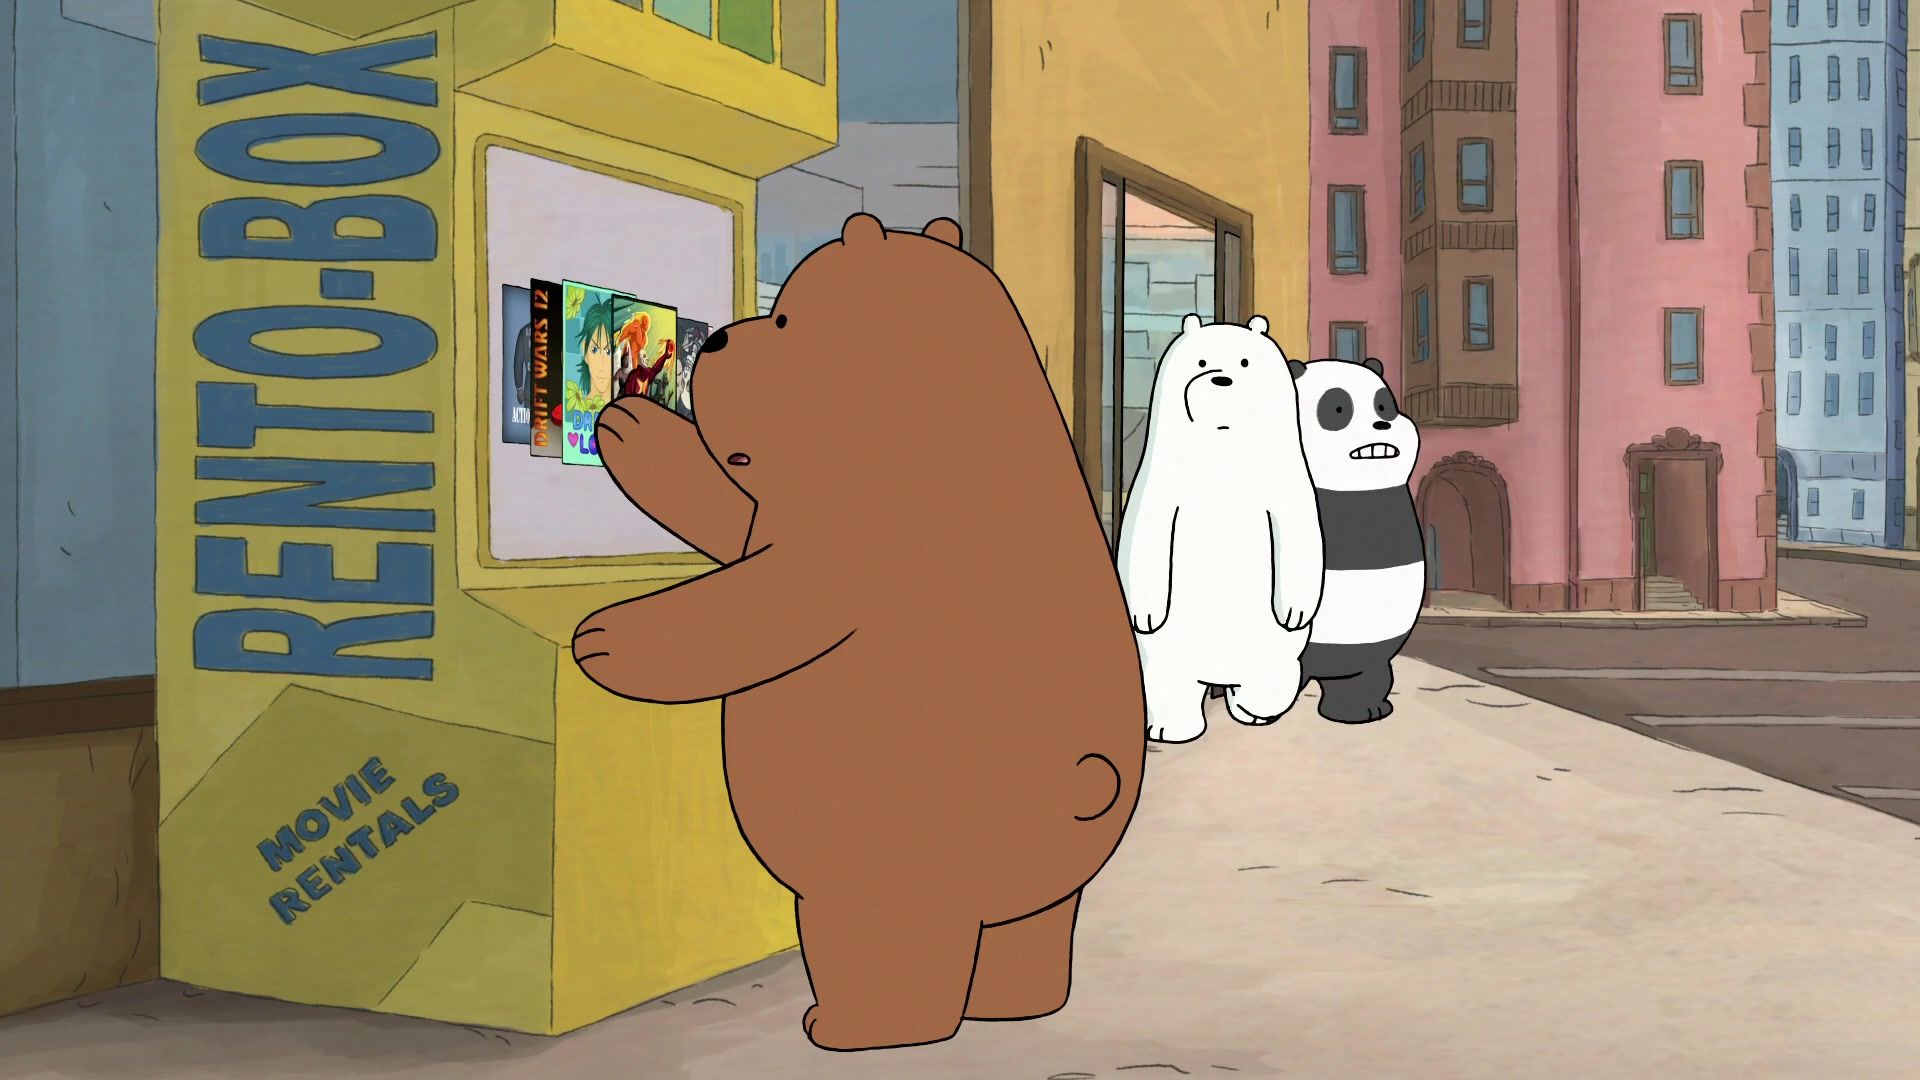 We Bare Bears: The Movie - The bears are back in an all-new adventure! - We Bare Bears